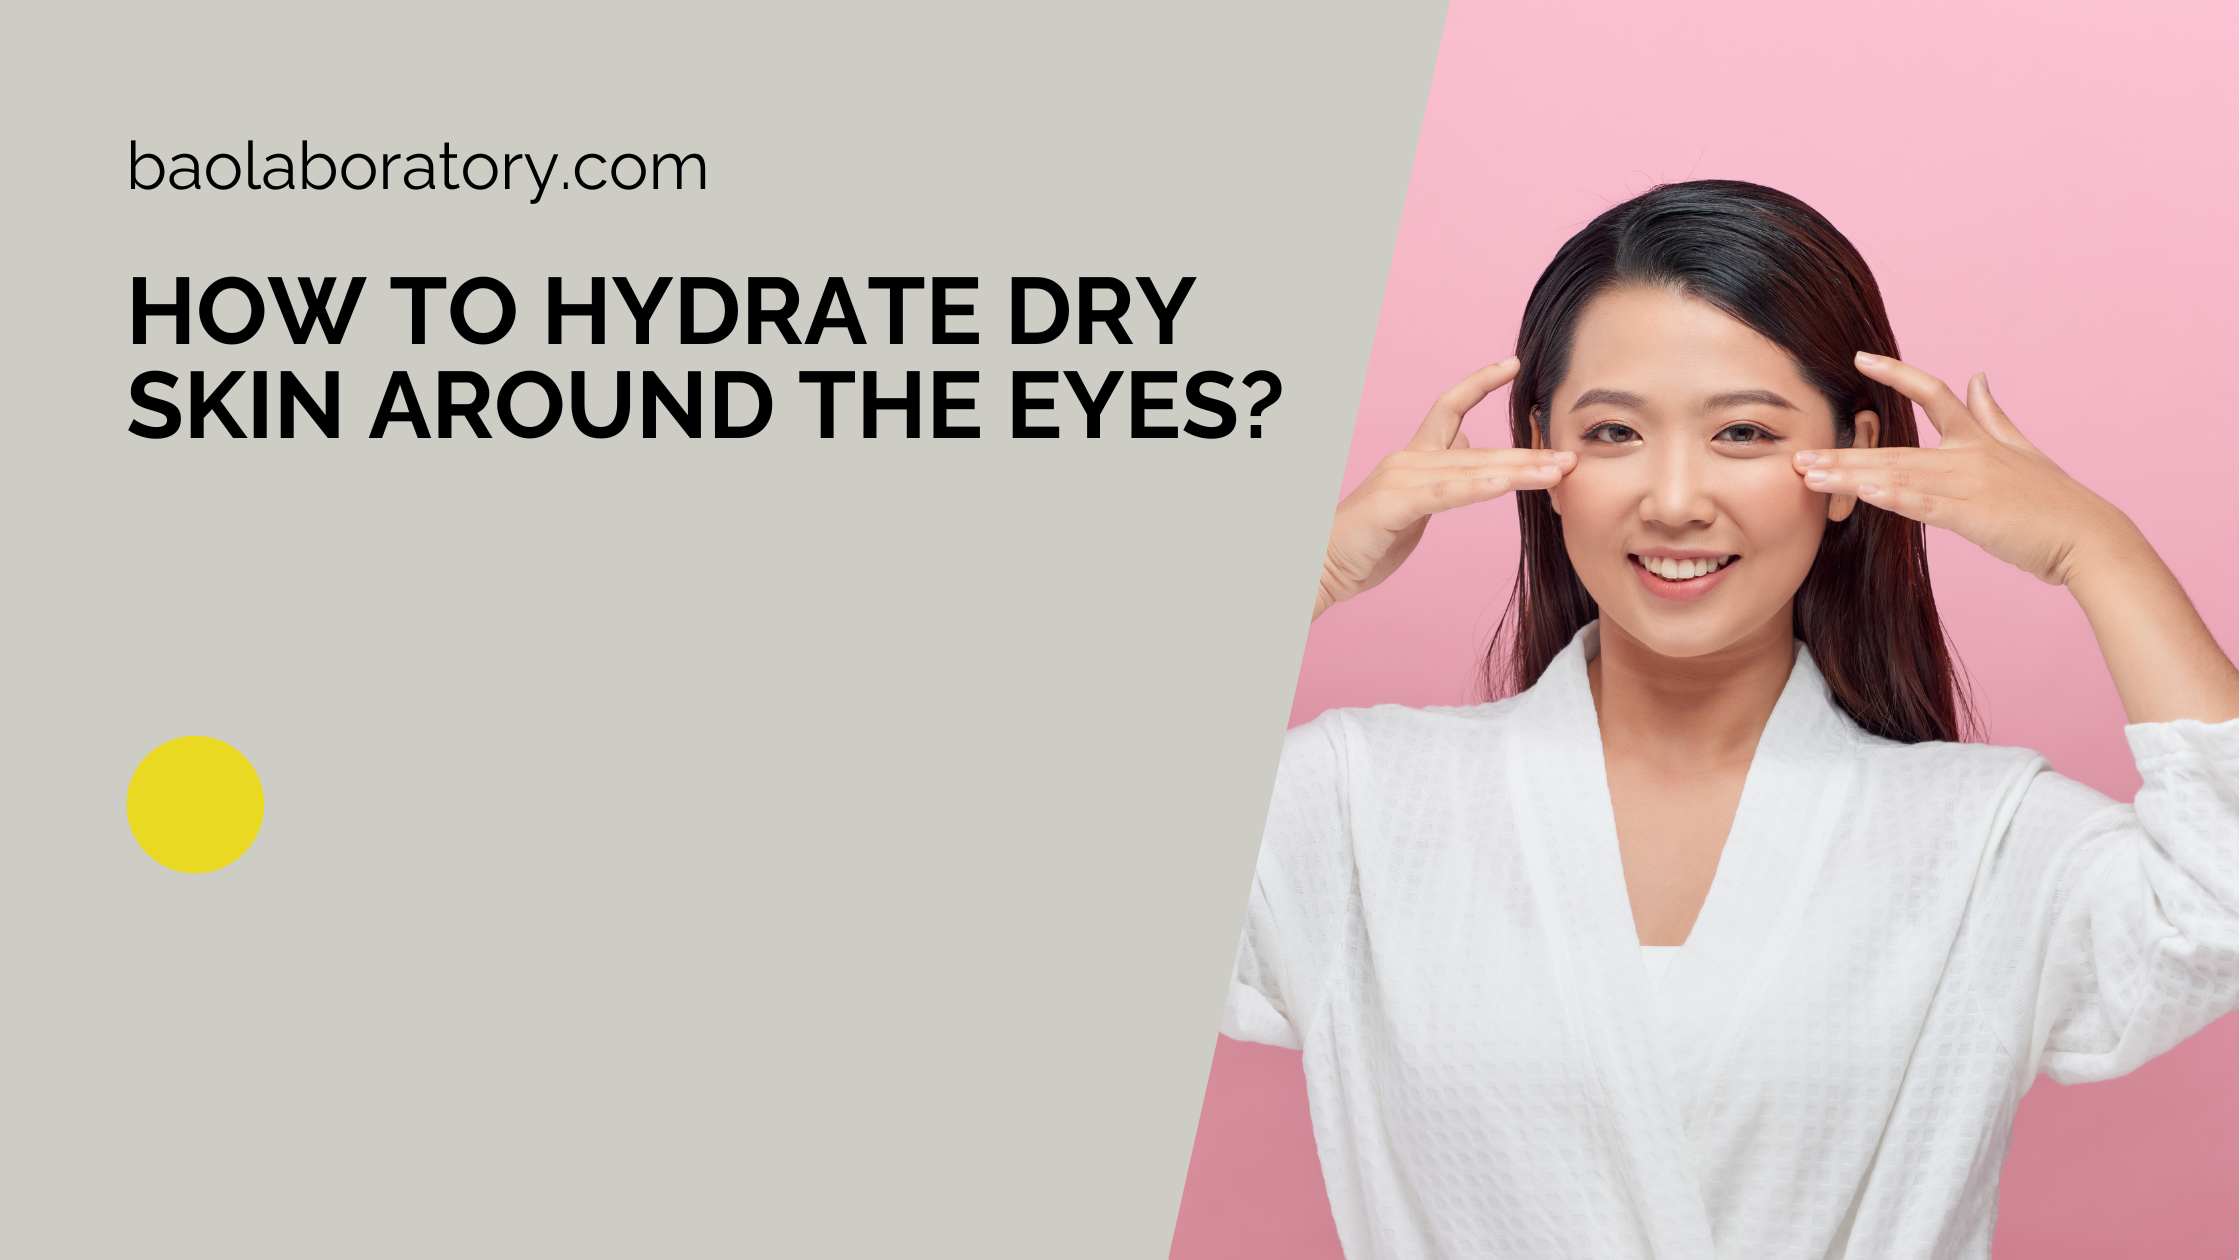 How to Hydrate Dry Skin around the Eyes